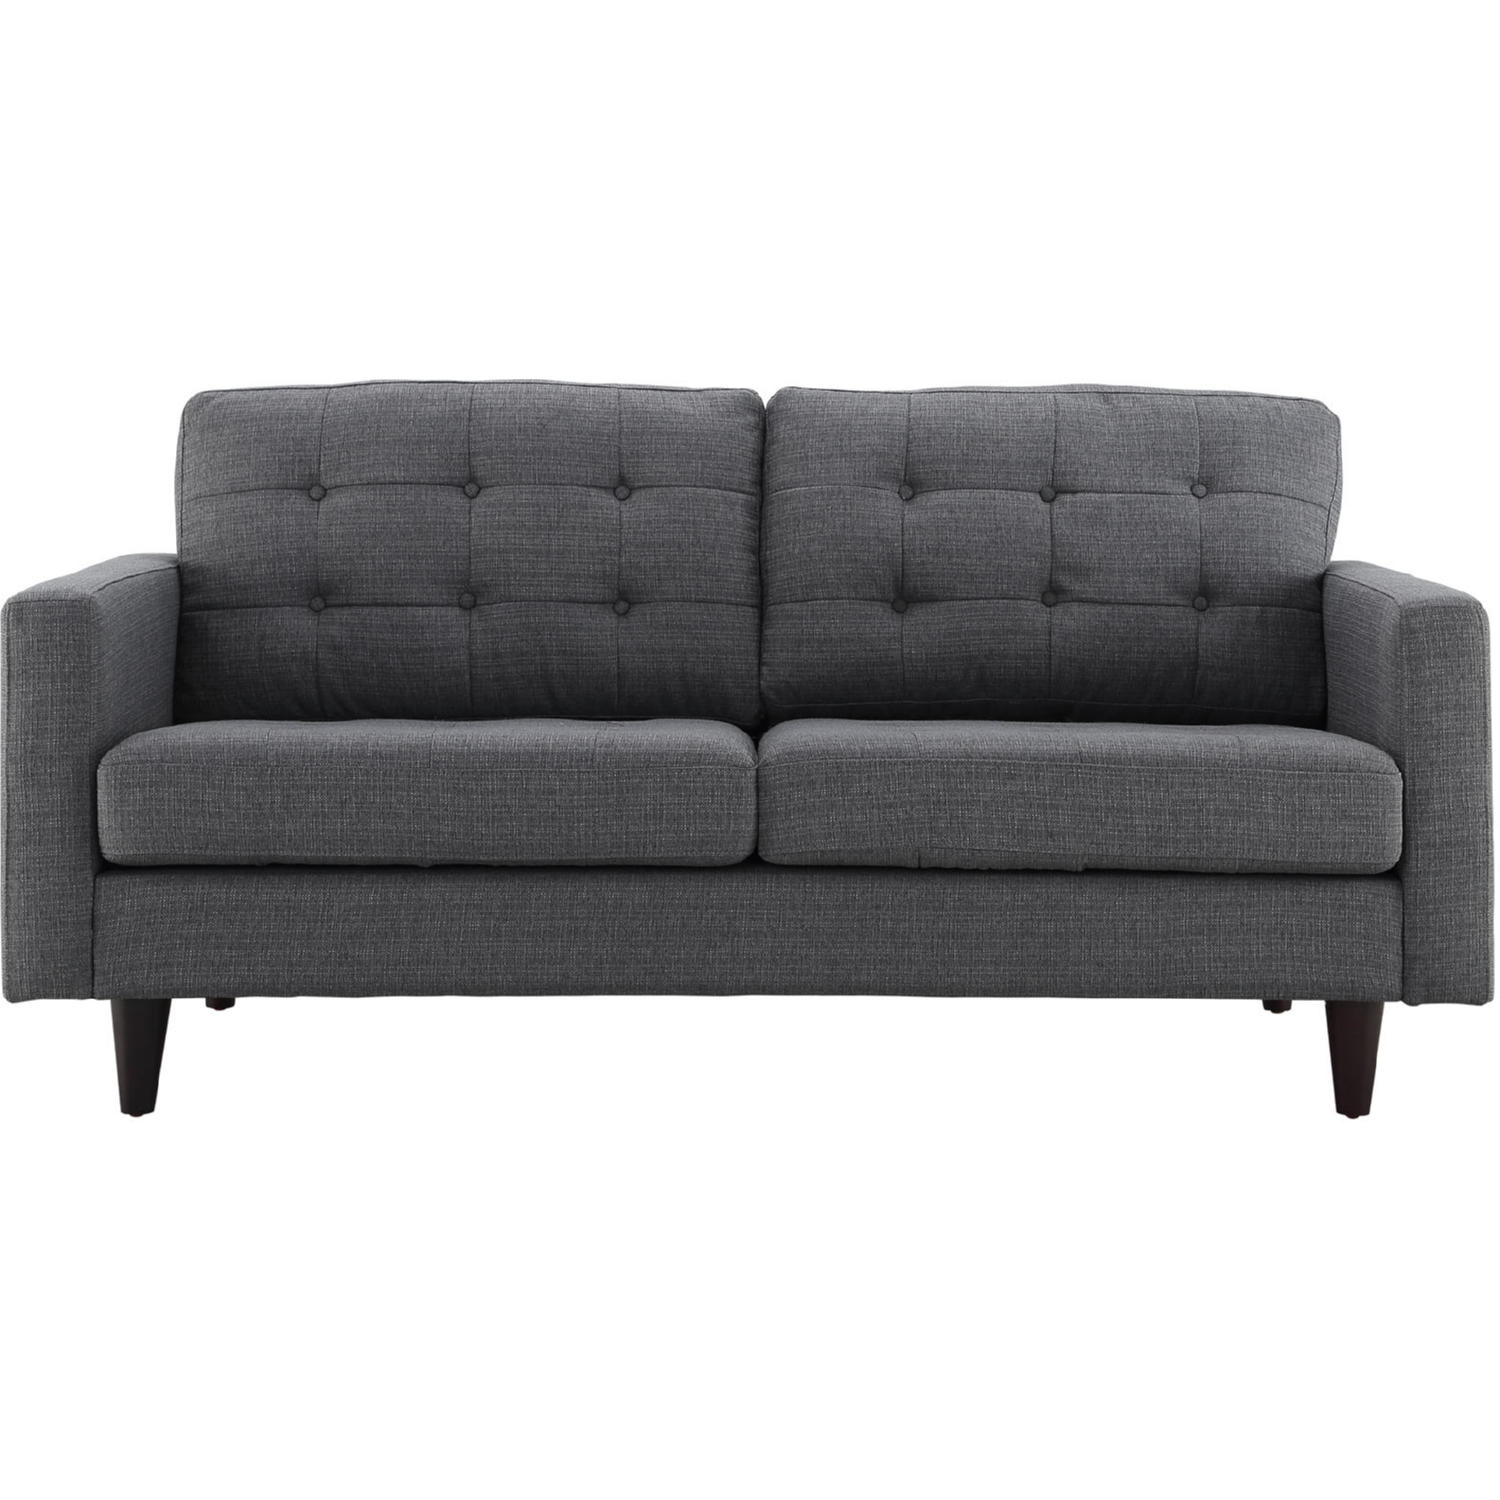 Modway EEI-1547-DOR Empress Loveseat in Tufted Gray Fabric